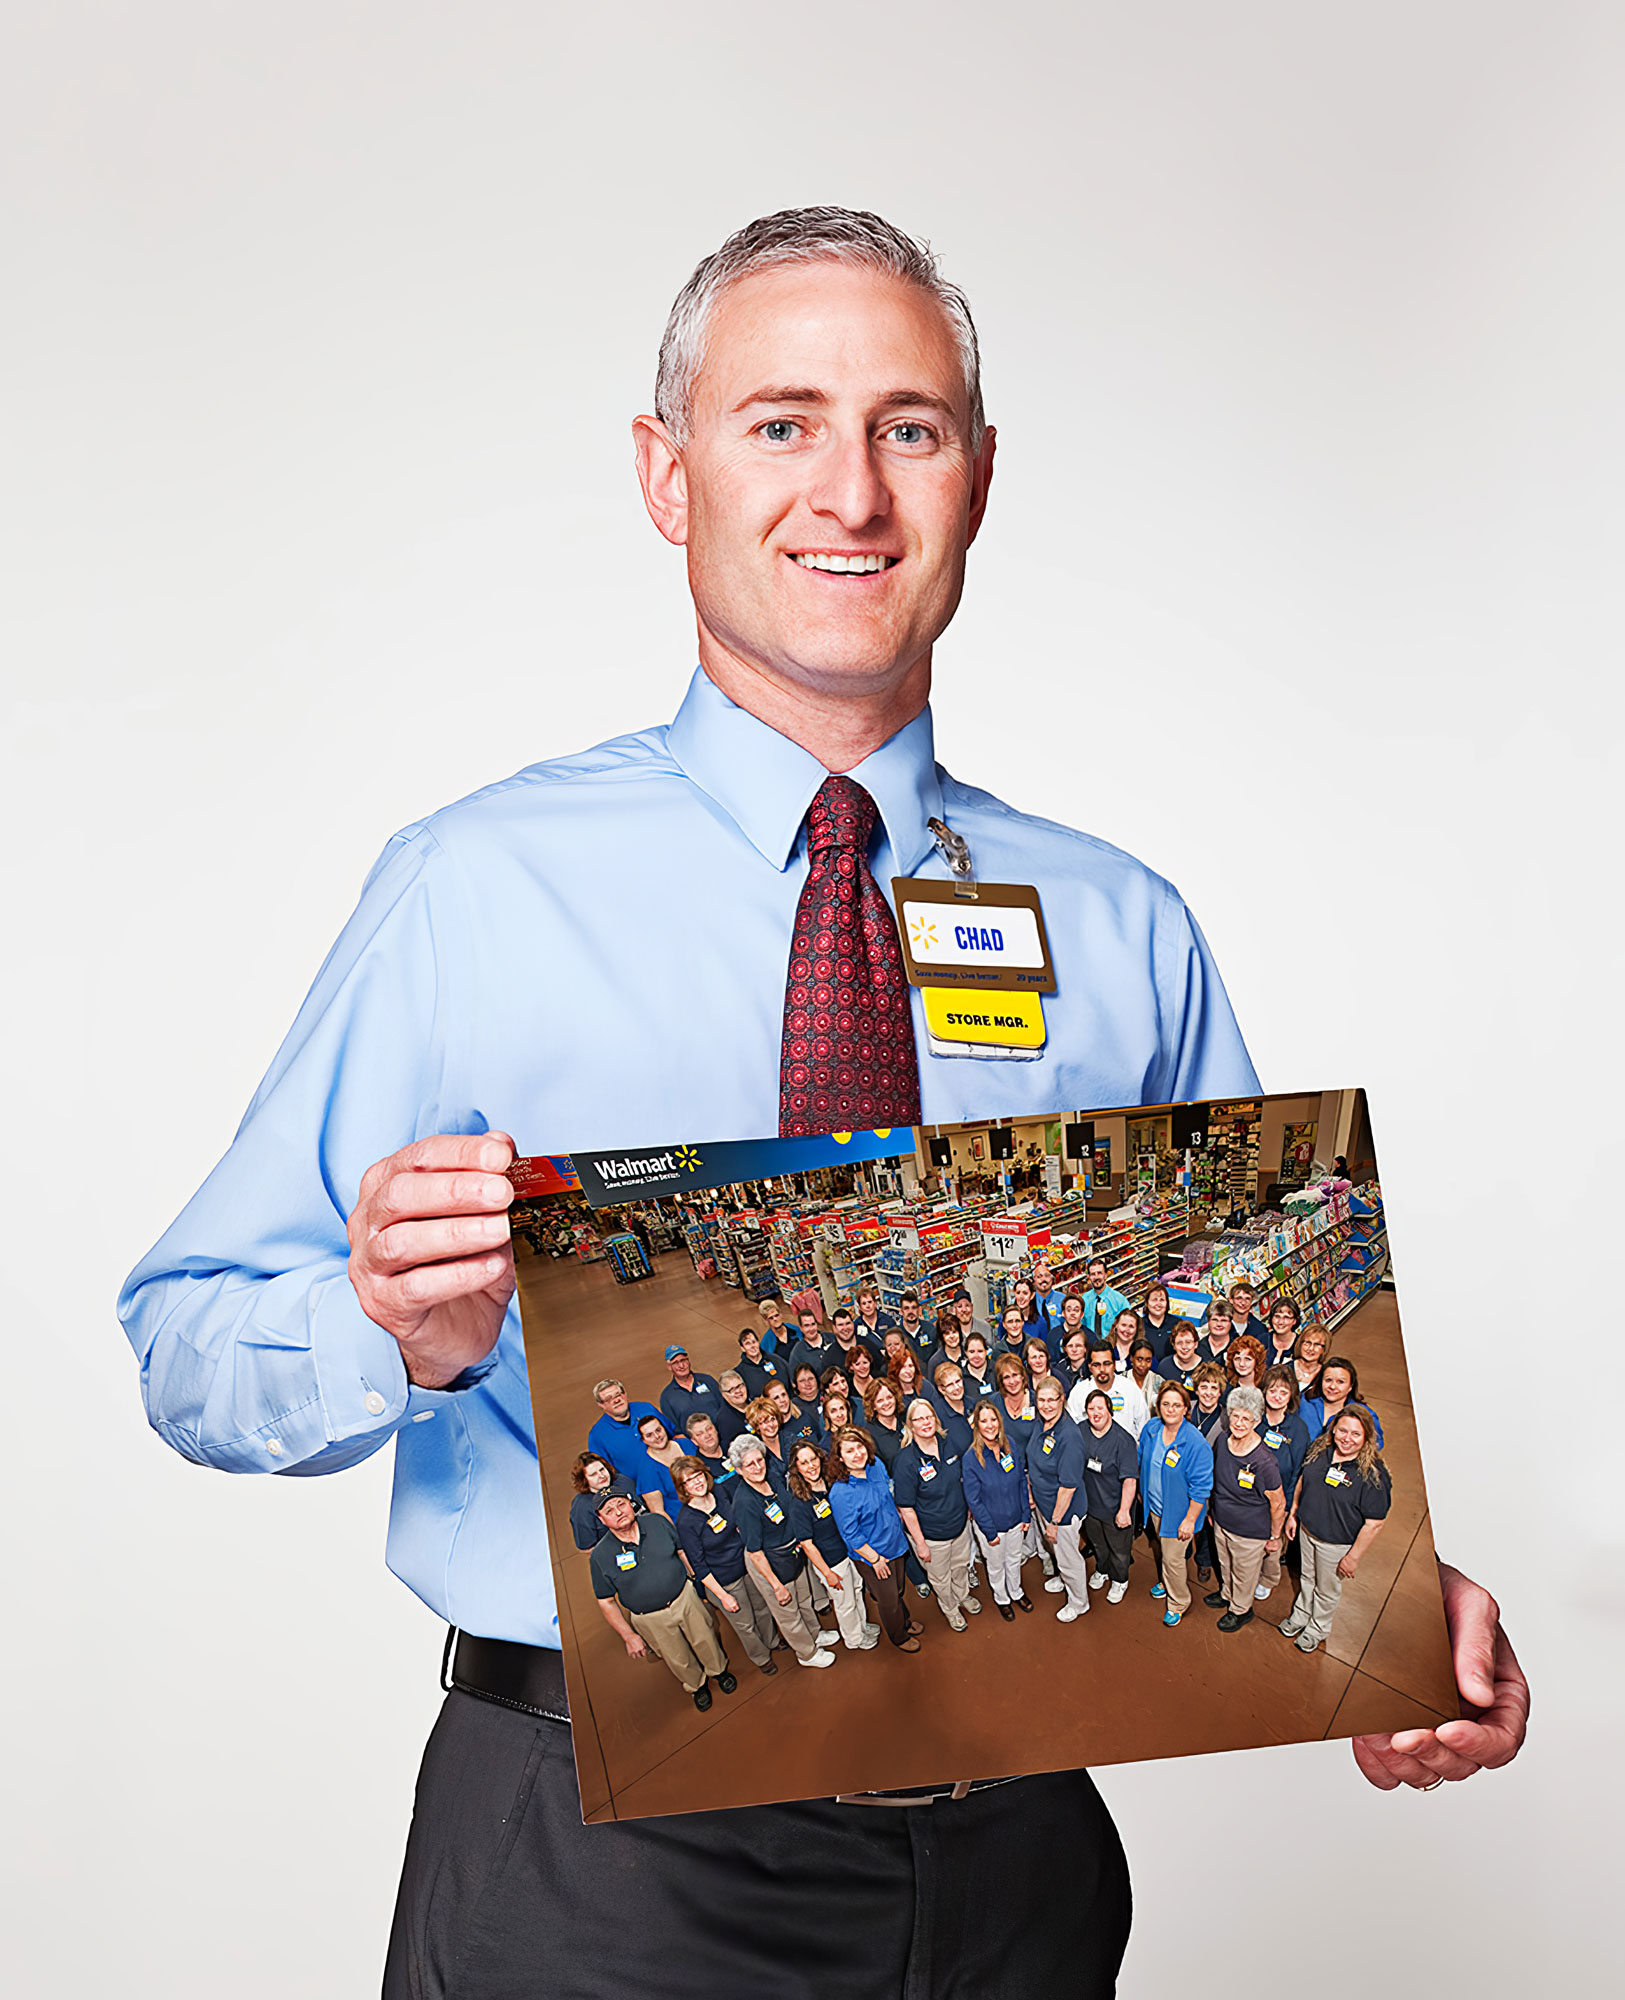 Chad’s Staff Photo Aaron C. Packard Photography Corporate